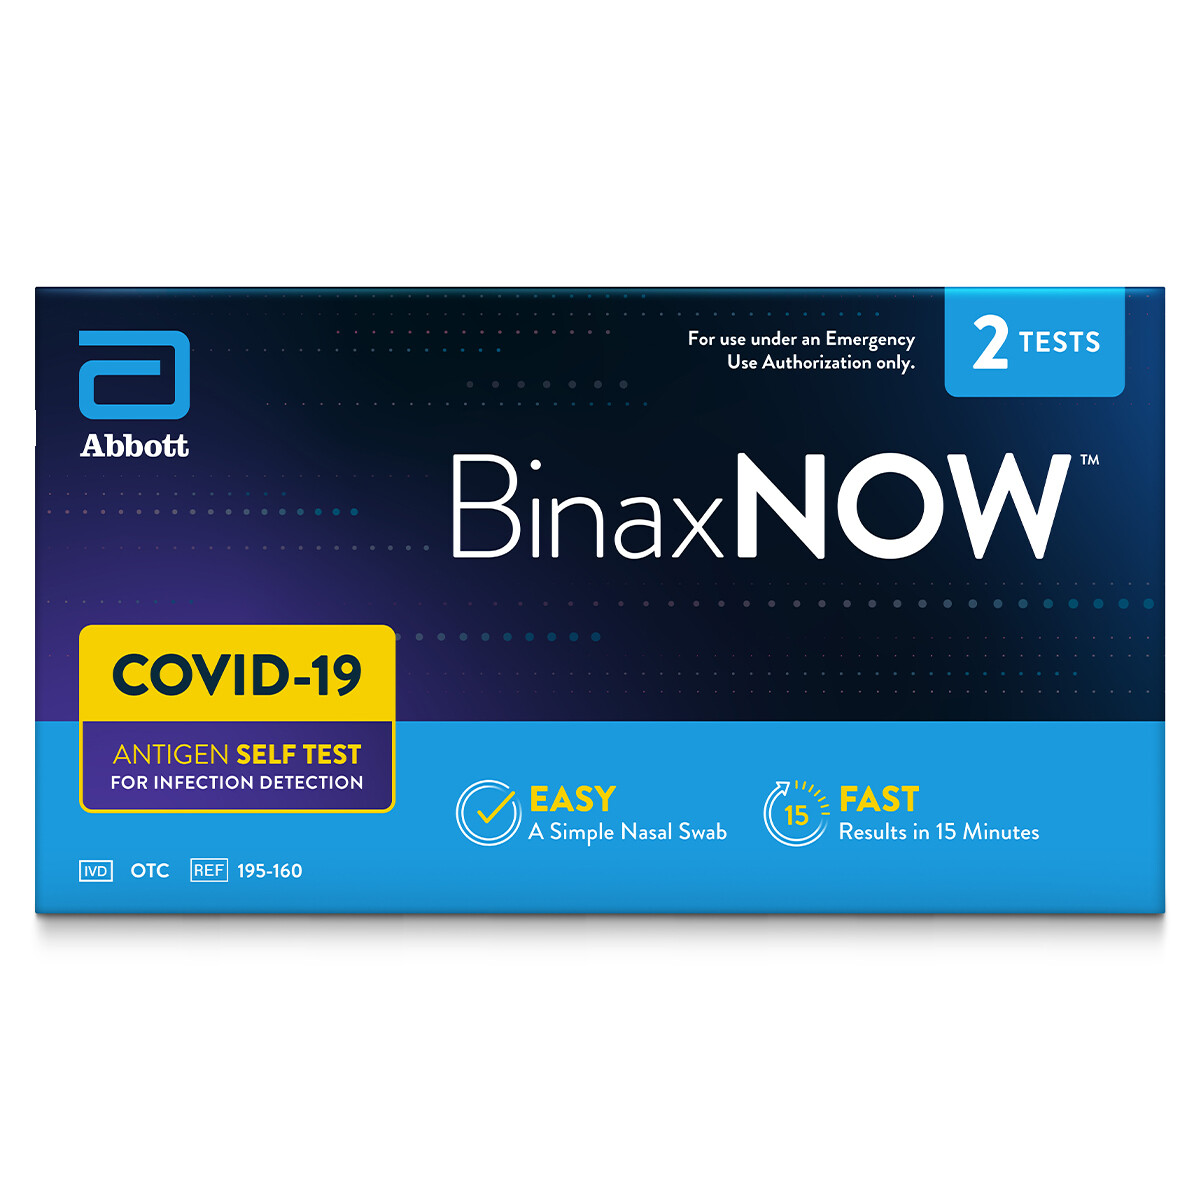 Update on COVID-19 Test Expirations